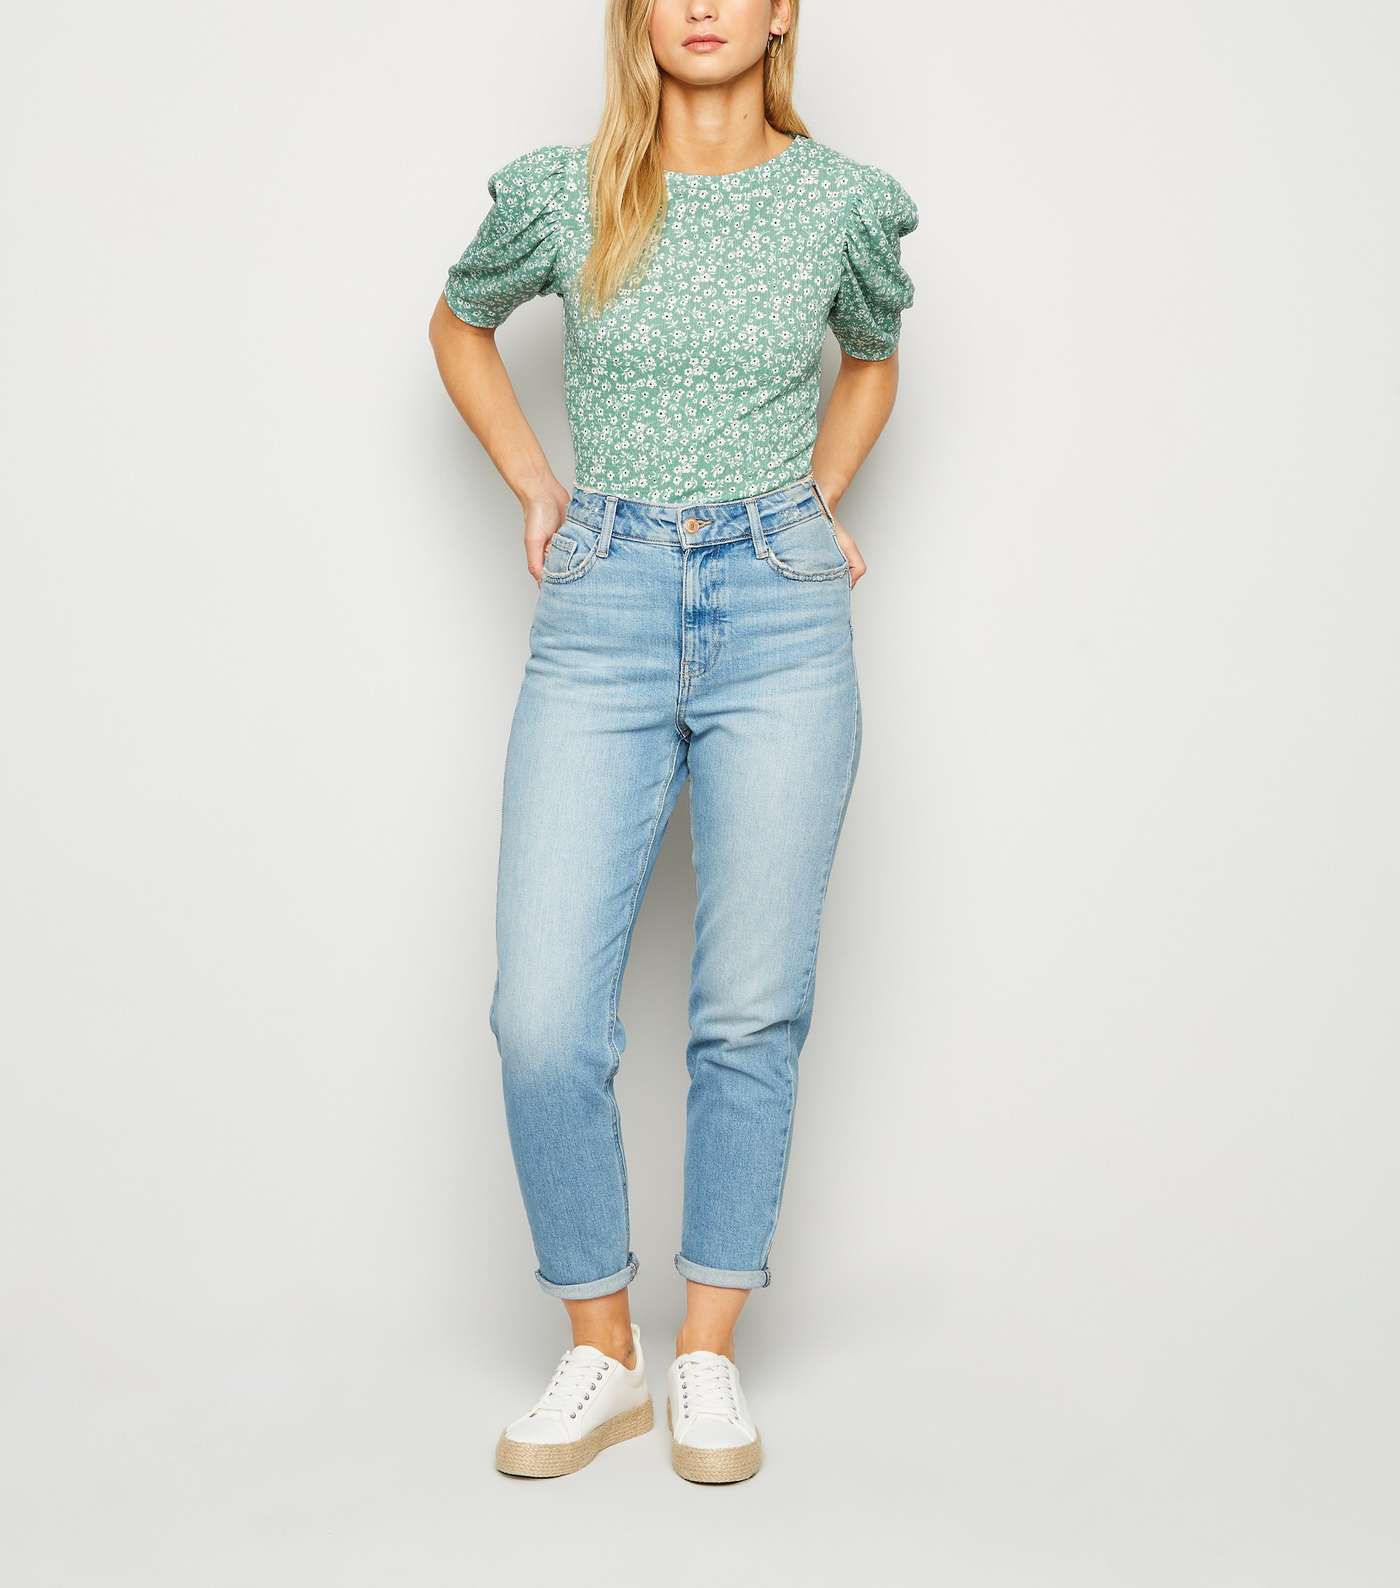 Green Floral Textured Puff Sleeve Top Image 2